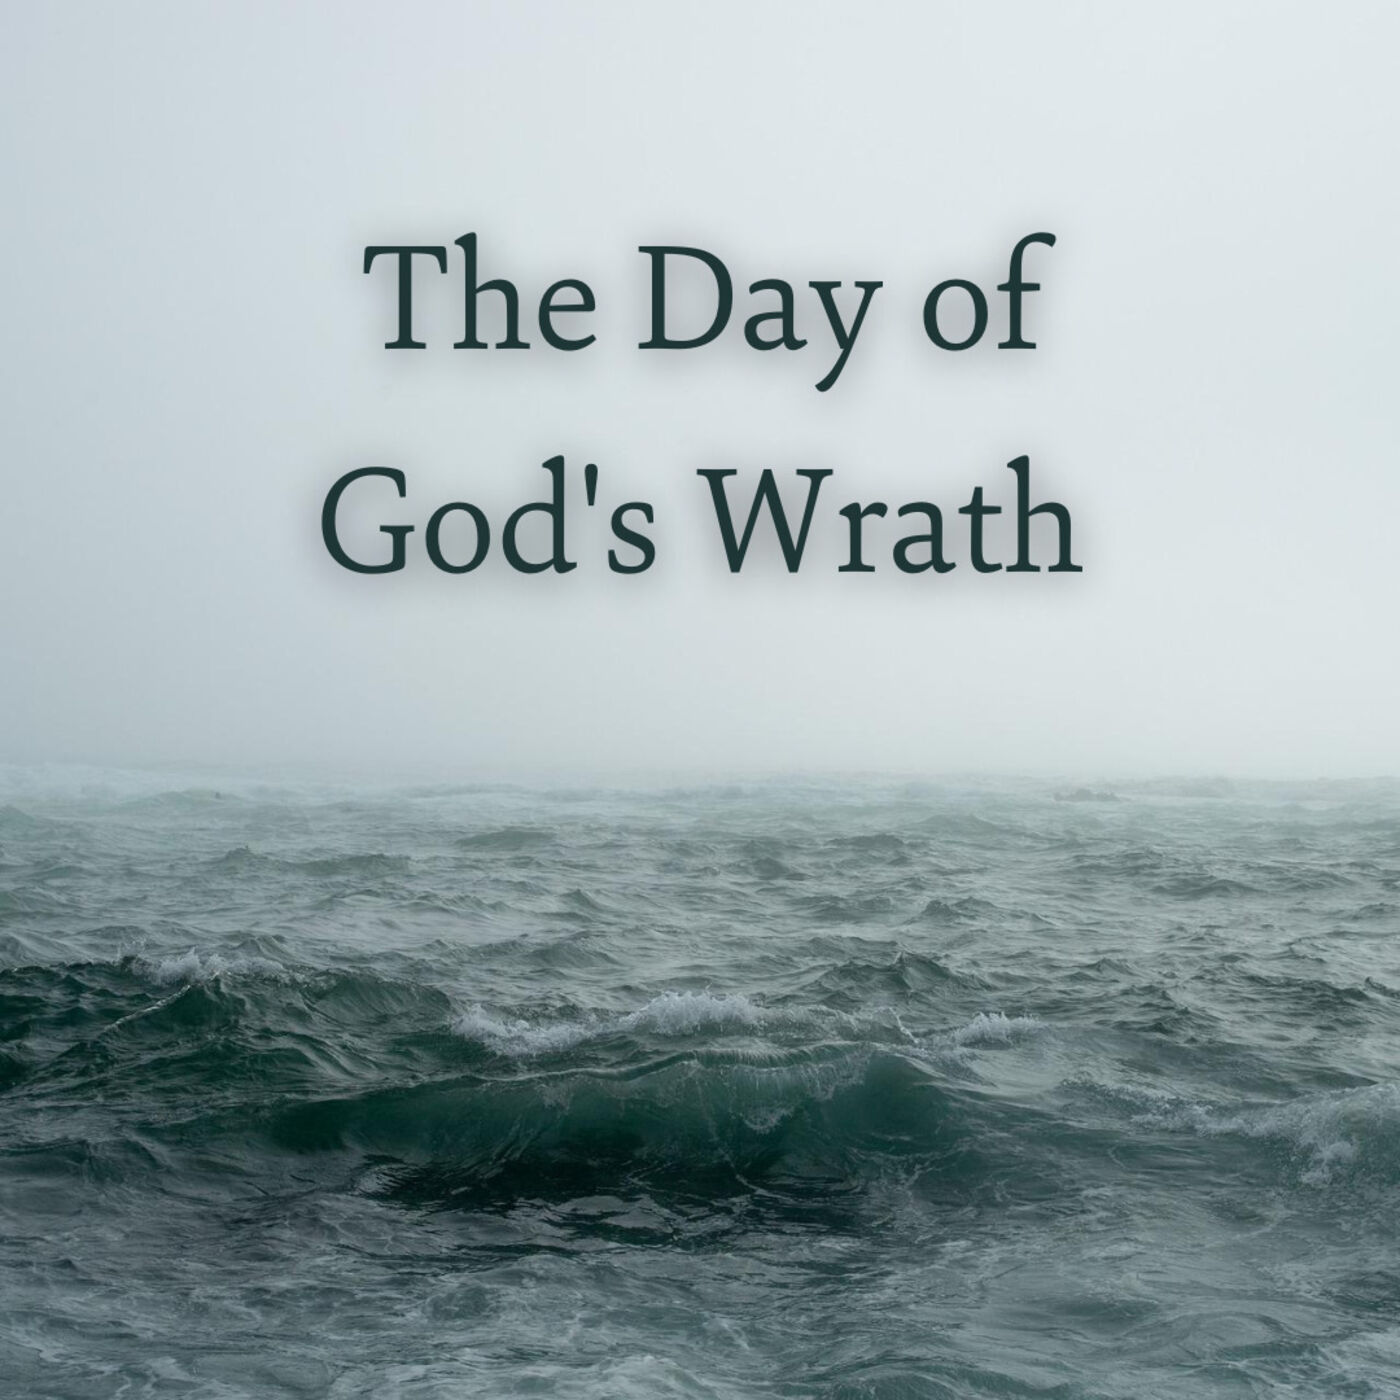 The Day of God's Wrath